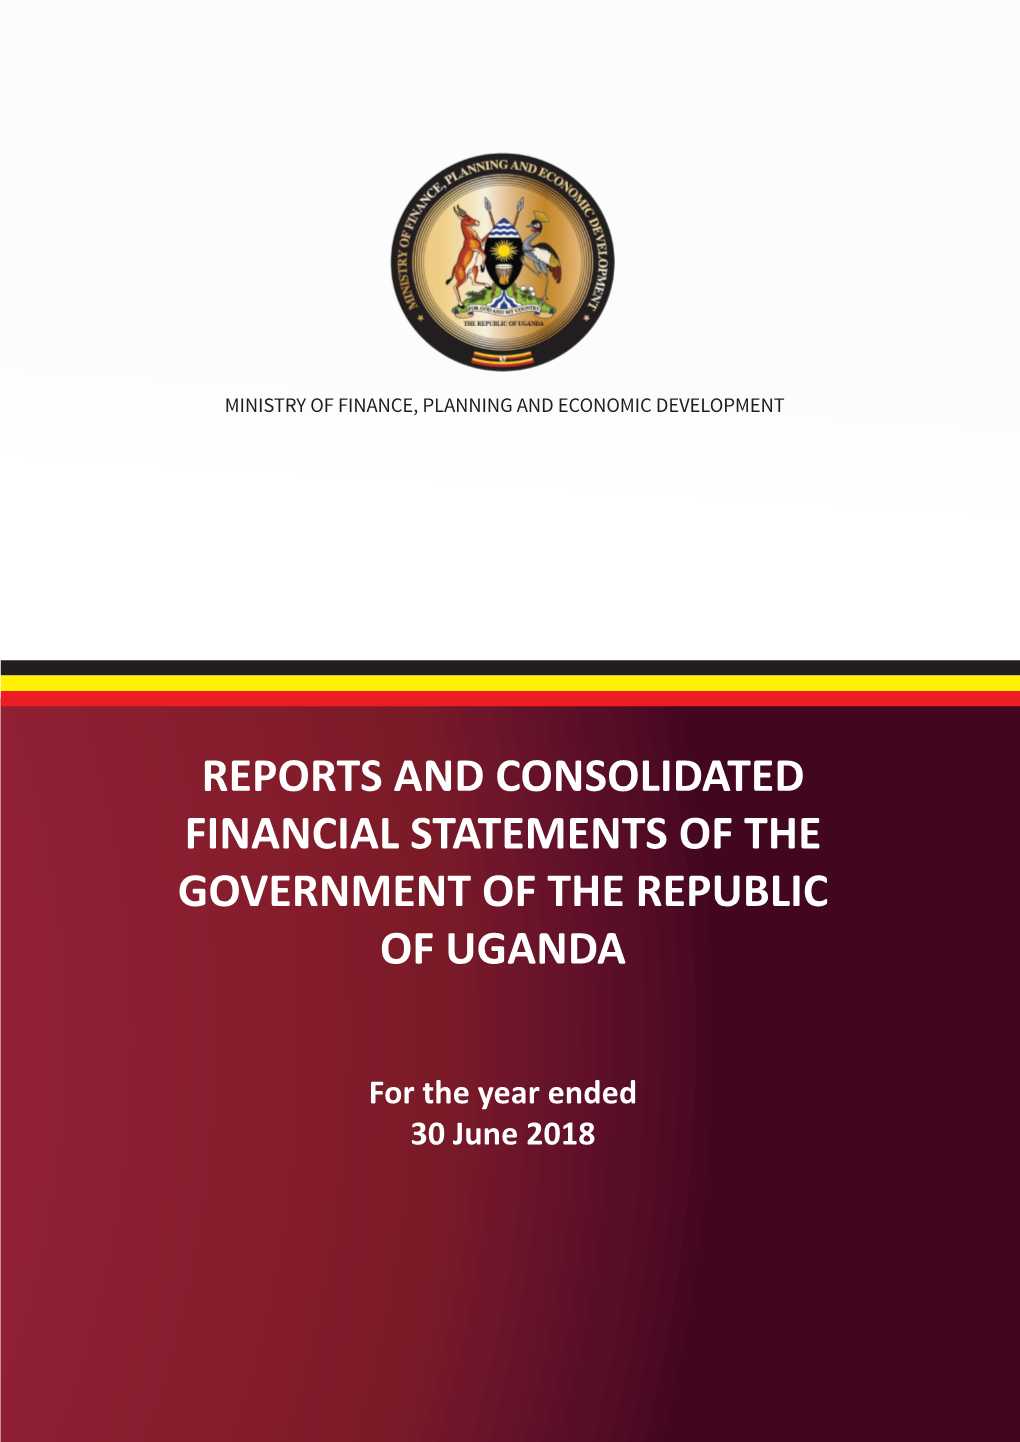 Reports and Consolidated Financial Statements of the Government of the Republic of Uganda